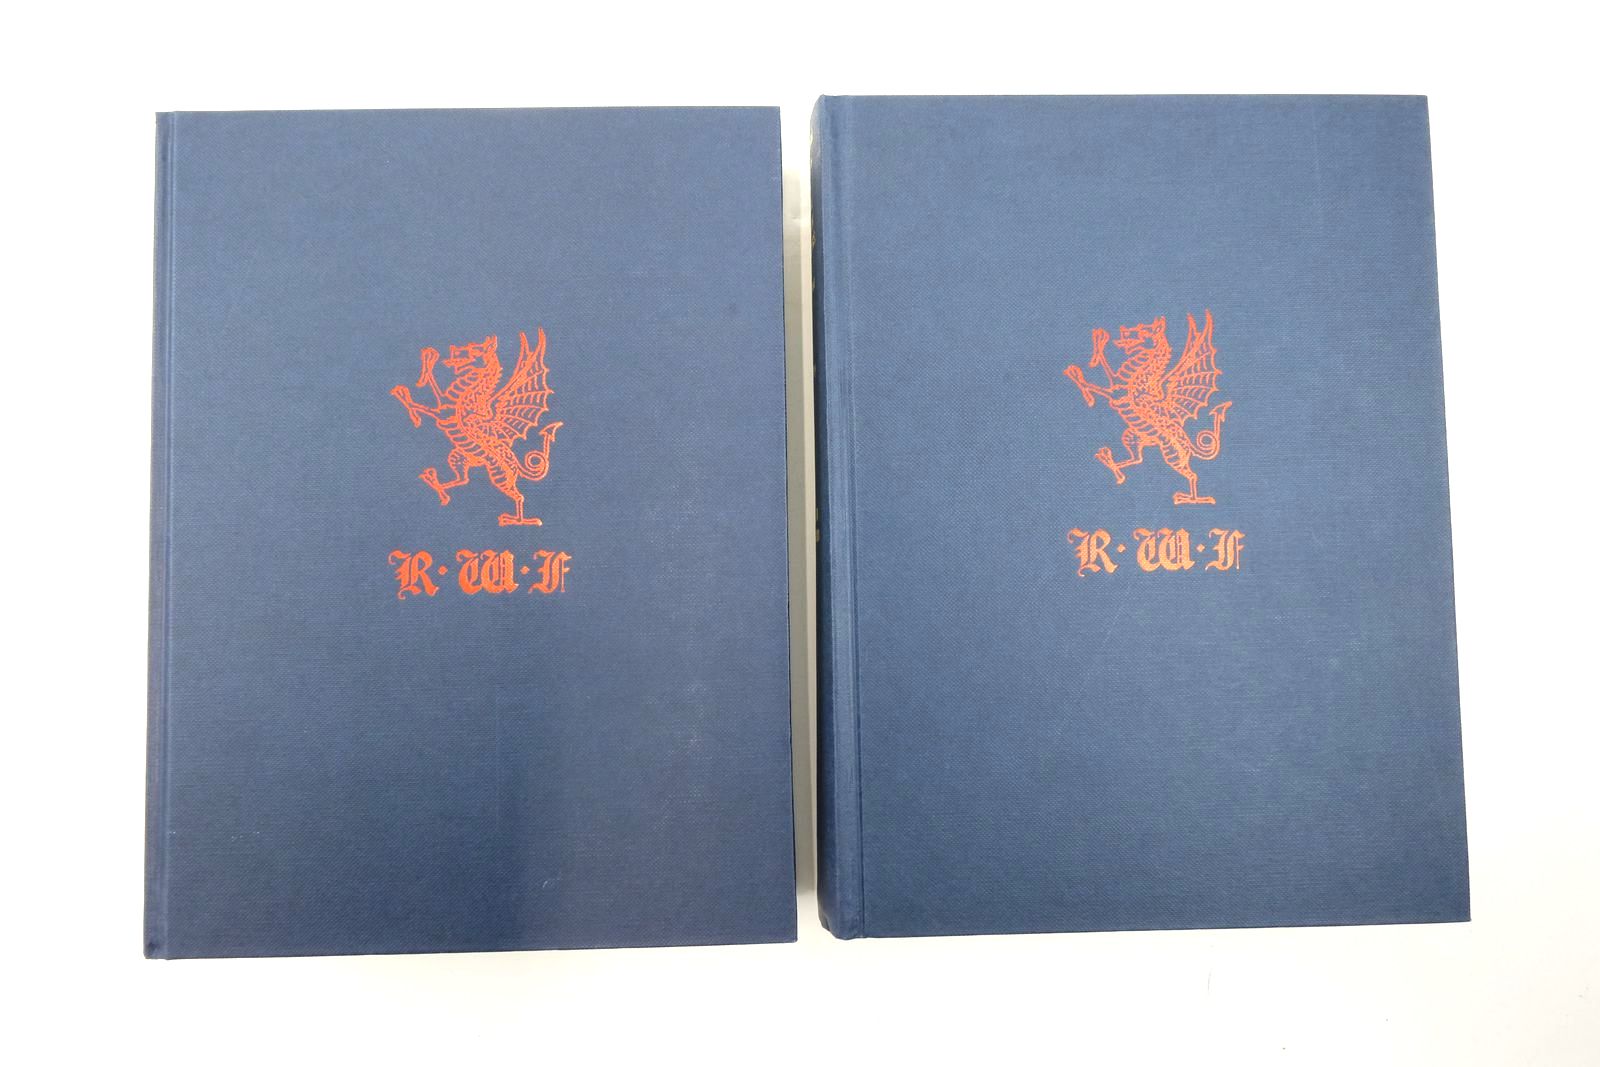 Photo of REGIMENTAL RECORDS OF THE ROYAL WELCH FUSILIERS 1945-2000 (2 VOLUMES) written by Riley, J.P.
Sinnett, R.J.M.
Crocker, P.A.
Williams, L.J. Egan Howell published by The Royal Welch Fusiliers (STOCK CODE: 2137739)  for sale by Stella & Rose's Books